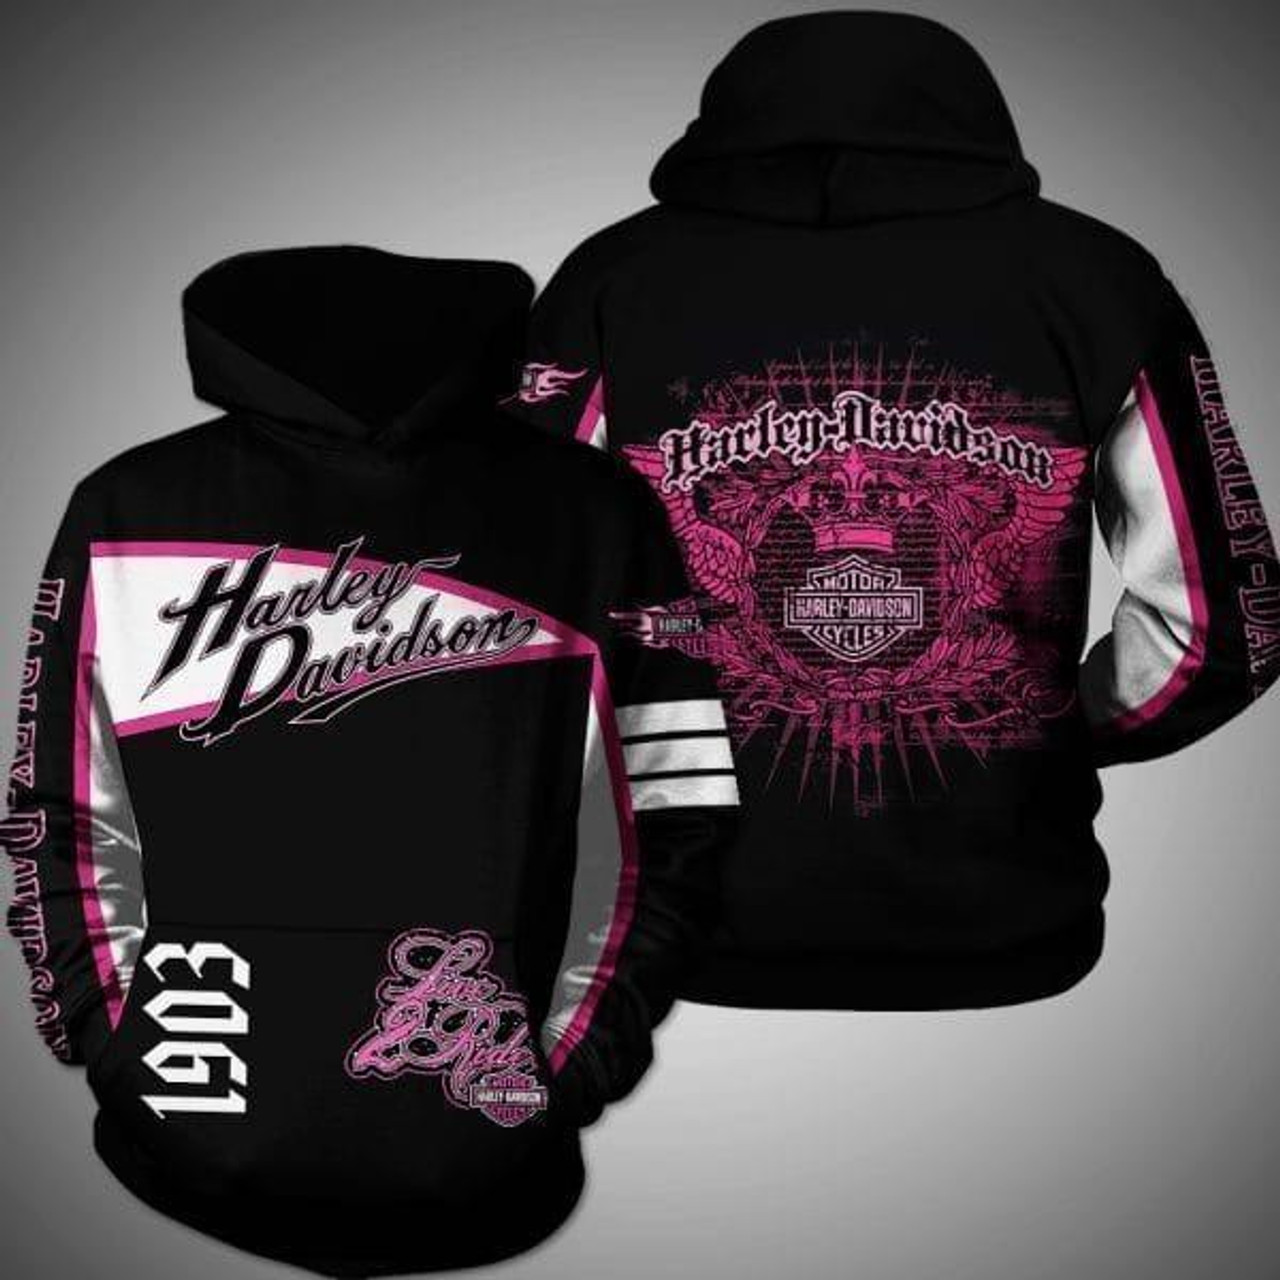  **(OFFICIAL-HARLEY-DAVIDSON-MOTORCYCLE-LADIES-PULLOVER-HOODIES/LIVE-TO-RIDE-IN-OFFICIAL-CLASSIC-HARLEY-BLACK & PINK-COLORS & OFFICIAL-HARLEY-PINK-LOGOS/NICE-DETAILED-CUSTOM-3D-GRAPHIC-PRINTED-DOUBLE-SIDED-DESIGNED/WARM-PREMIUM-HARLEY-WOMENS-BIKER-RIDING-PULLOVER-HOODIES)**